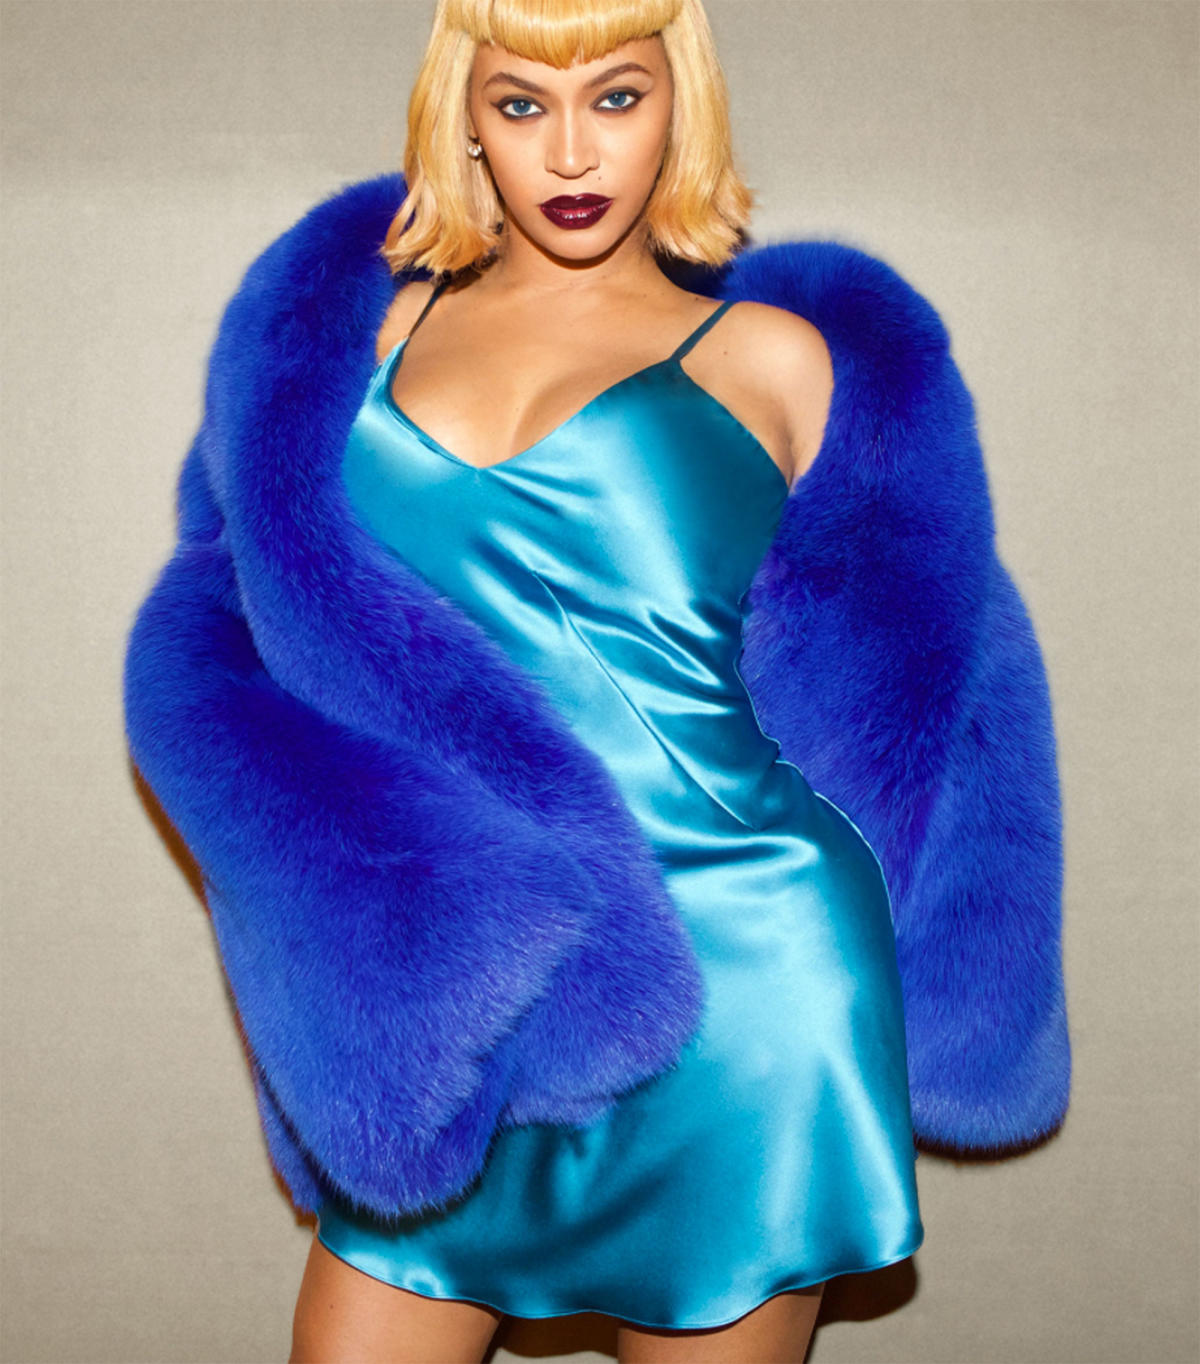 Beyoncé Called Lil Kim The Original Queen B And Recreated Five Of Her  Looks, And We Can't Deal